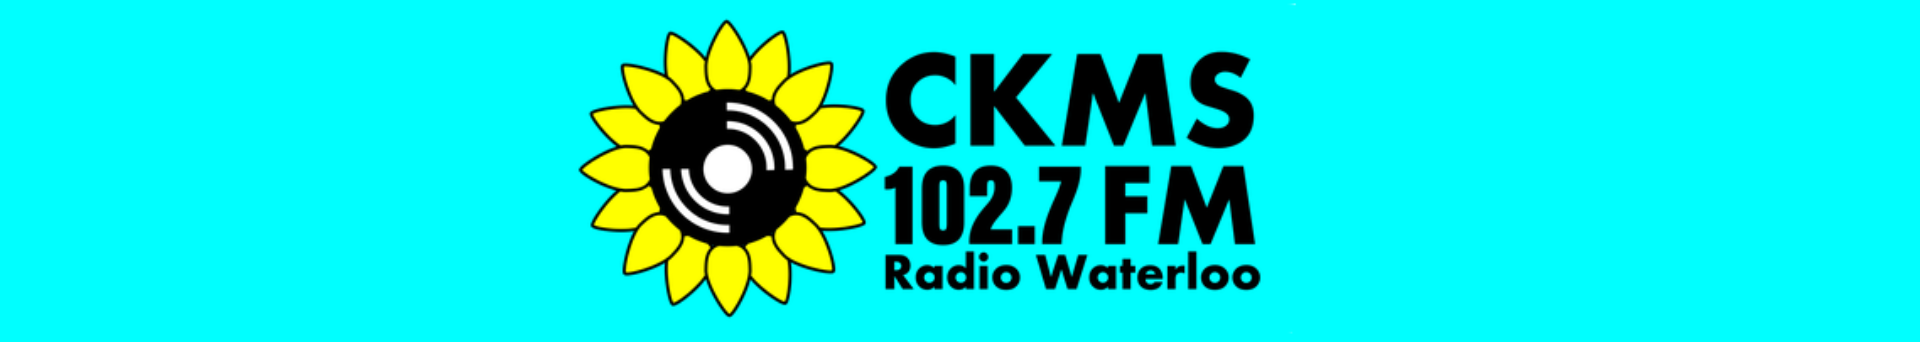 CKMS 102.7 FM Radio Waterloo (elongated teal rectangle with yellow and black sunflower on the left and black text on the right)